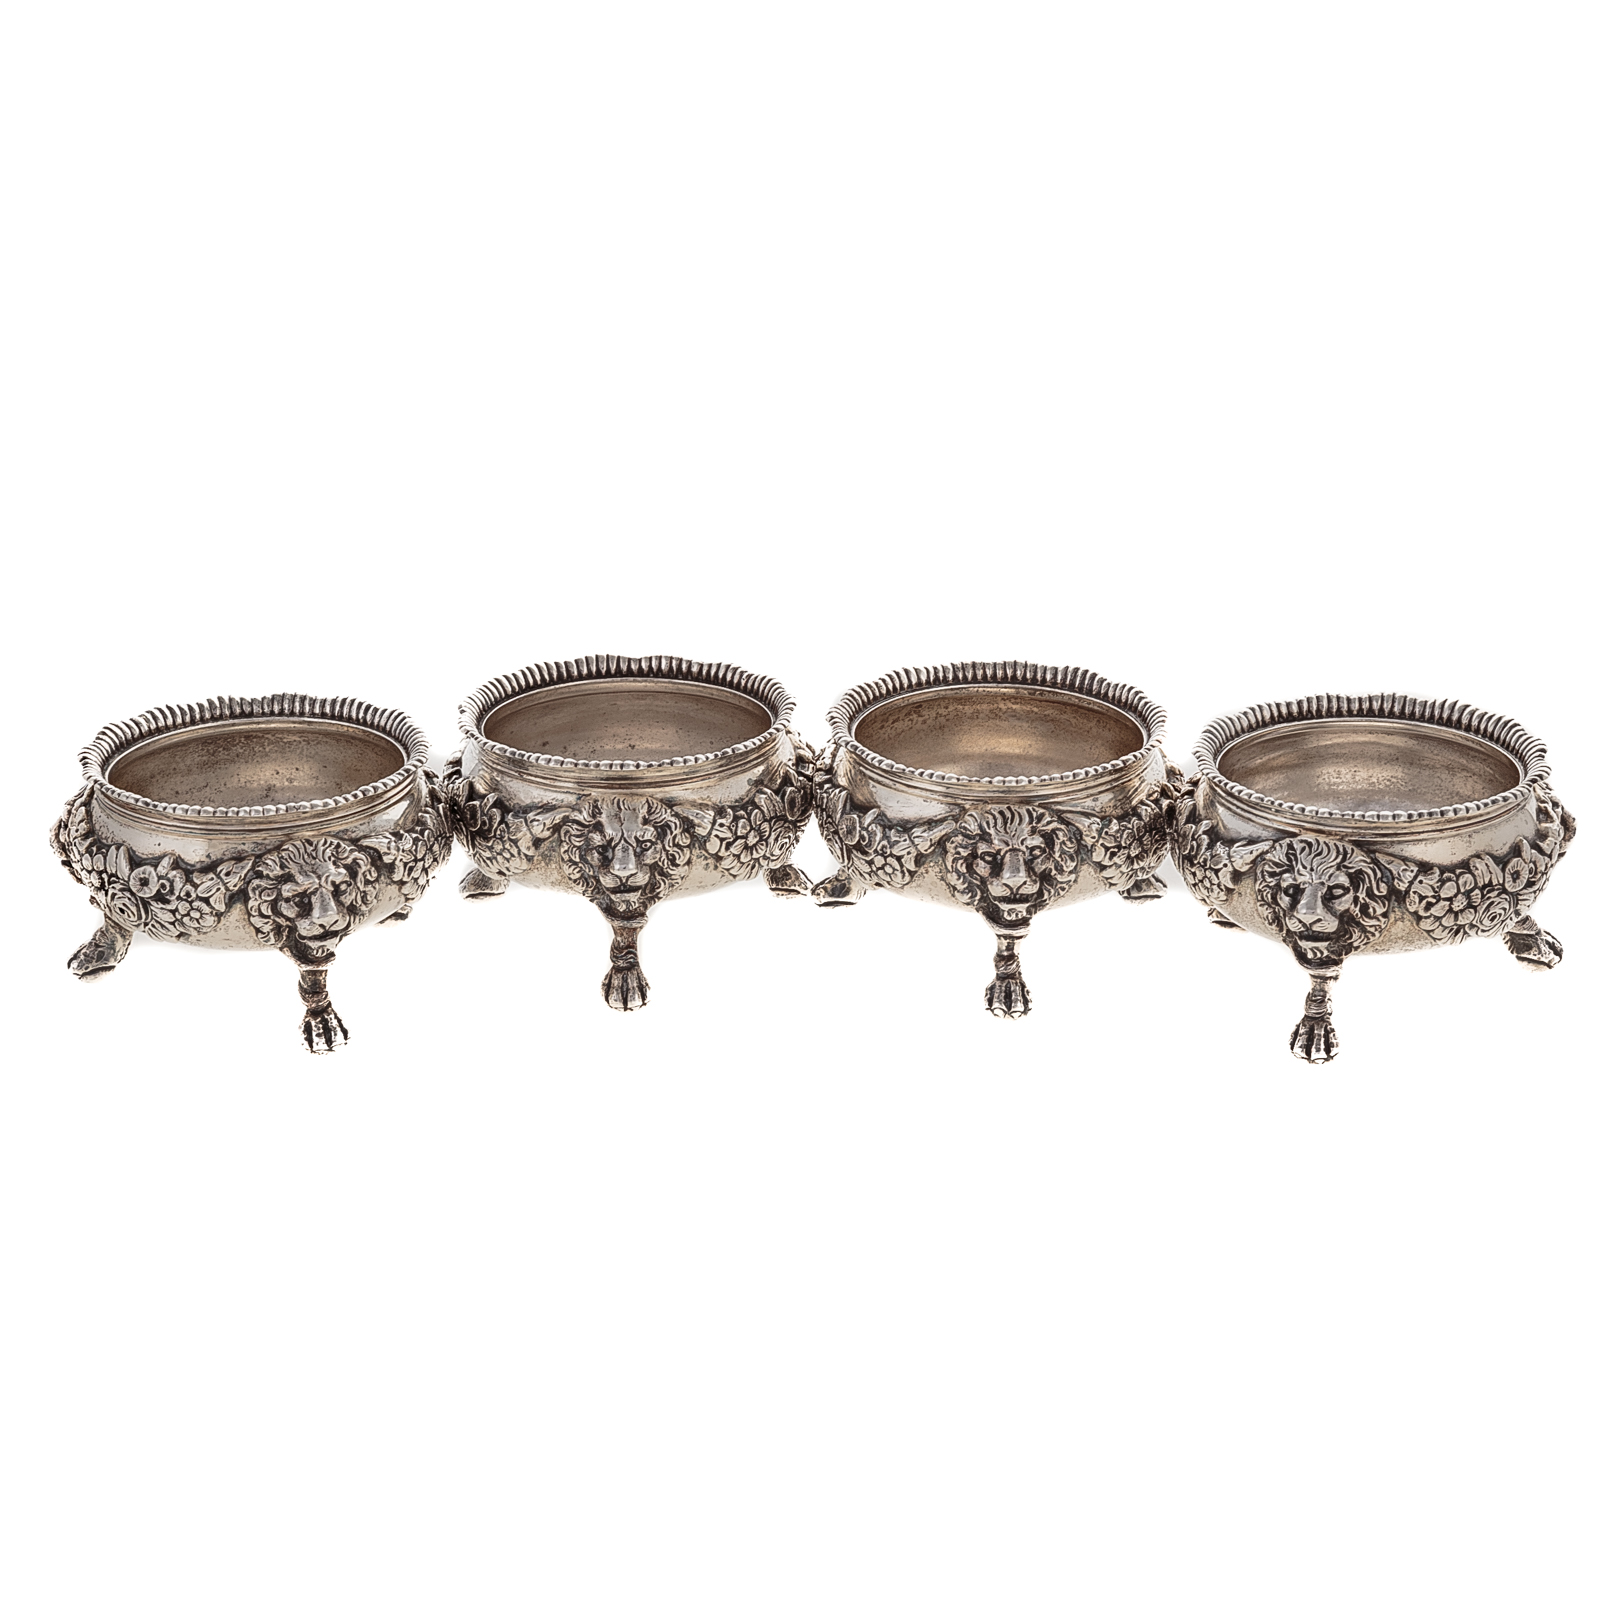 FOUR GEORGE V SILVER MASTER SALTS 3340a4